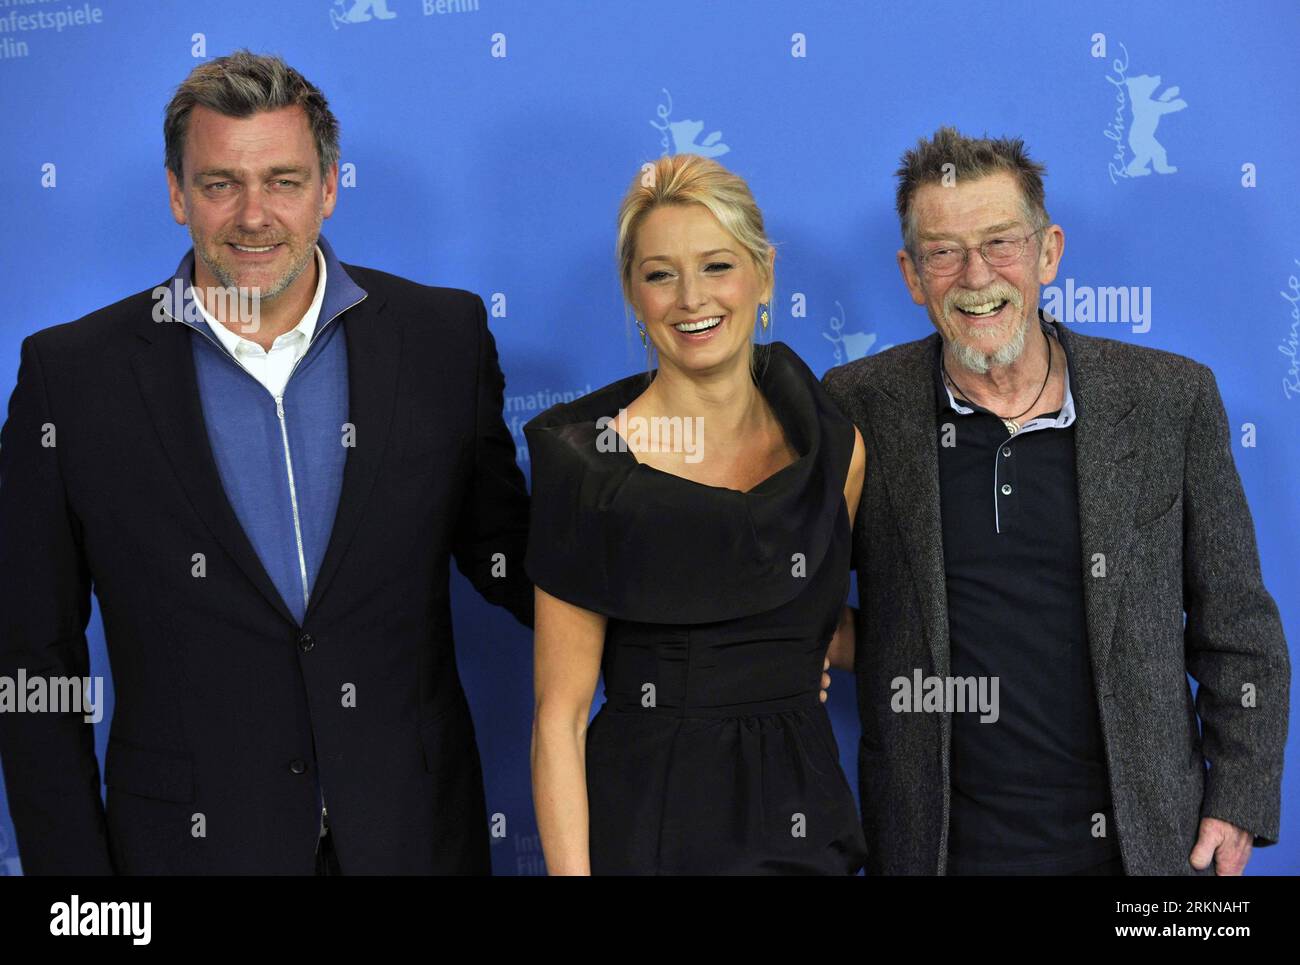 Bildnummer: 57066015  Datum: 13.02.2012  Copyright: imago/Xinhua (120213) -- BERLIN, Feb. 13, 2012 (Xinhua) -- Ray Stevenson (L), katherine Lanasa (C) and John Hurt, cast members of the film Jayne Mansfield s Car, pose during a photocall to promote their movie at the 62nd Berlinale film festival in Berlin, capital of Germany, on Feb. 13, 2012. (Xinhua/Ma Ning) (ypf) GERMANY-BERLINALE FILM FESTIVAL-JAYNE MANSFIELD S CAR PUBLICATIONxNOTxINxCHN People Kultur Entertainment Berlinale 62 Internationale Filmfestspiele xda x0x premiumd 2012 quer      57066015 Date 13 02 2012 Copyright Imago XINHUA  Be Stock Photo